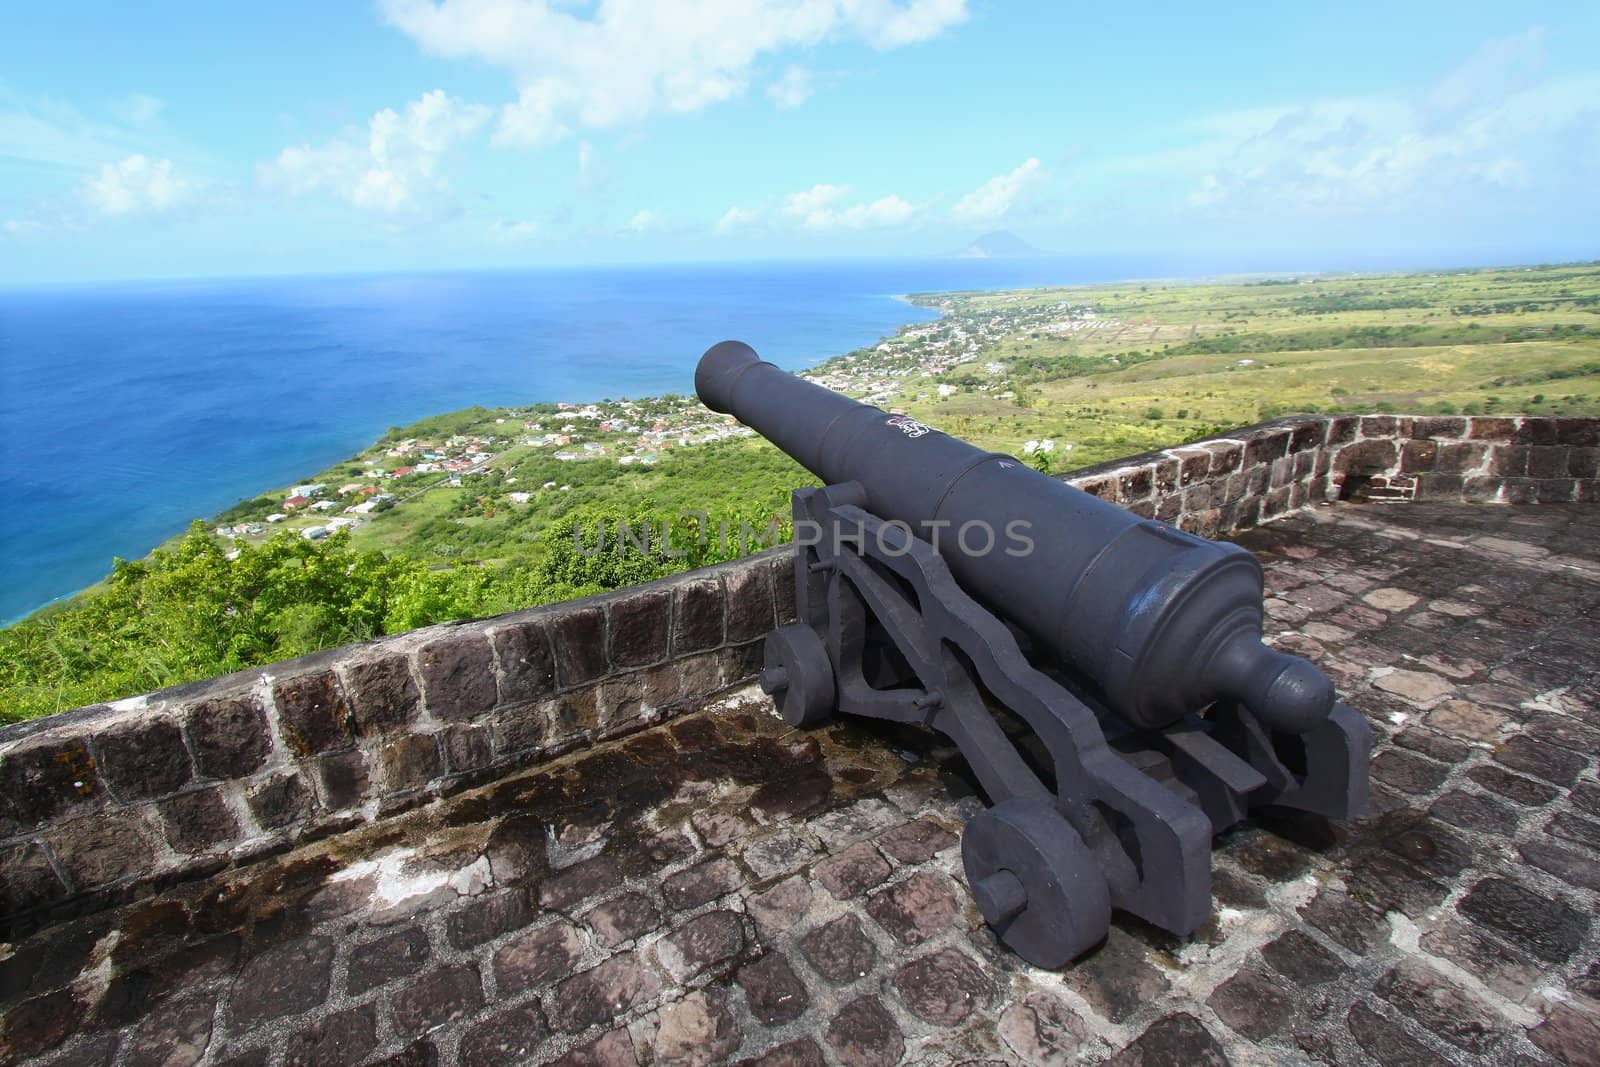 A cannon faces the Caribbean Sea at Brimstone Hill Fortress National Park on the island of St Kitts.